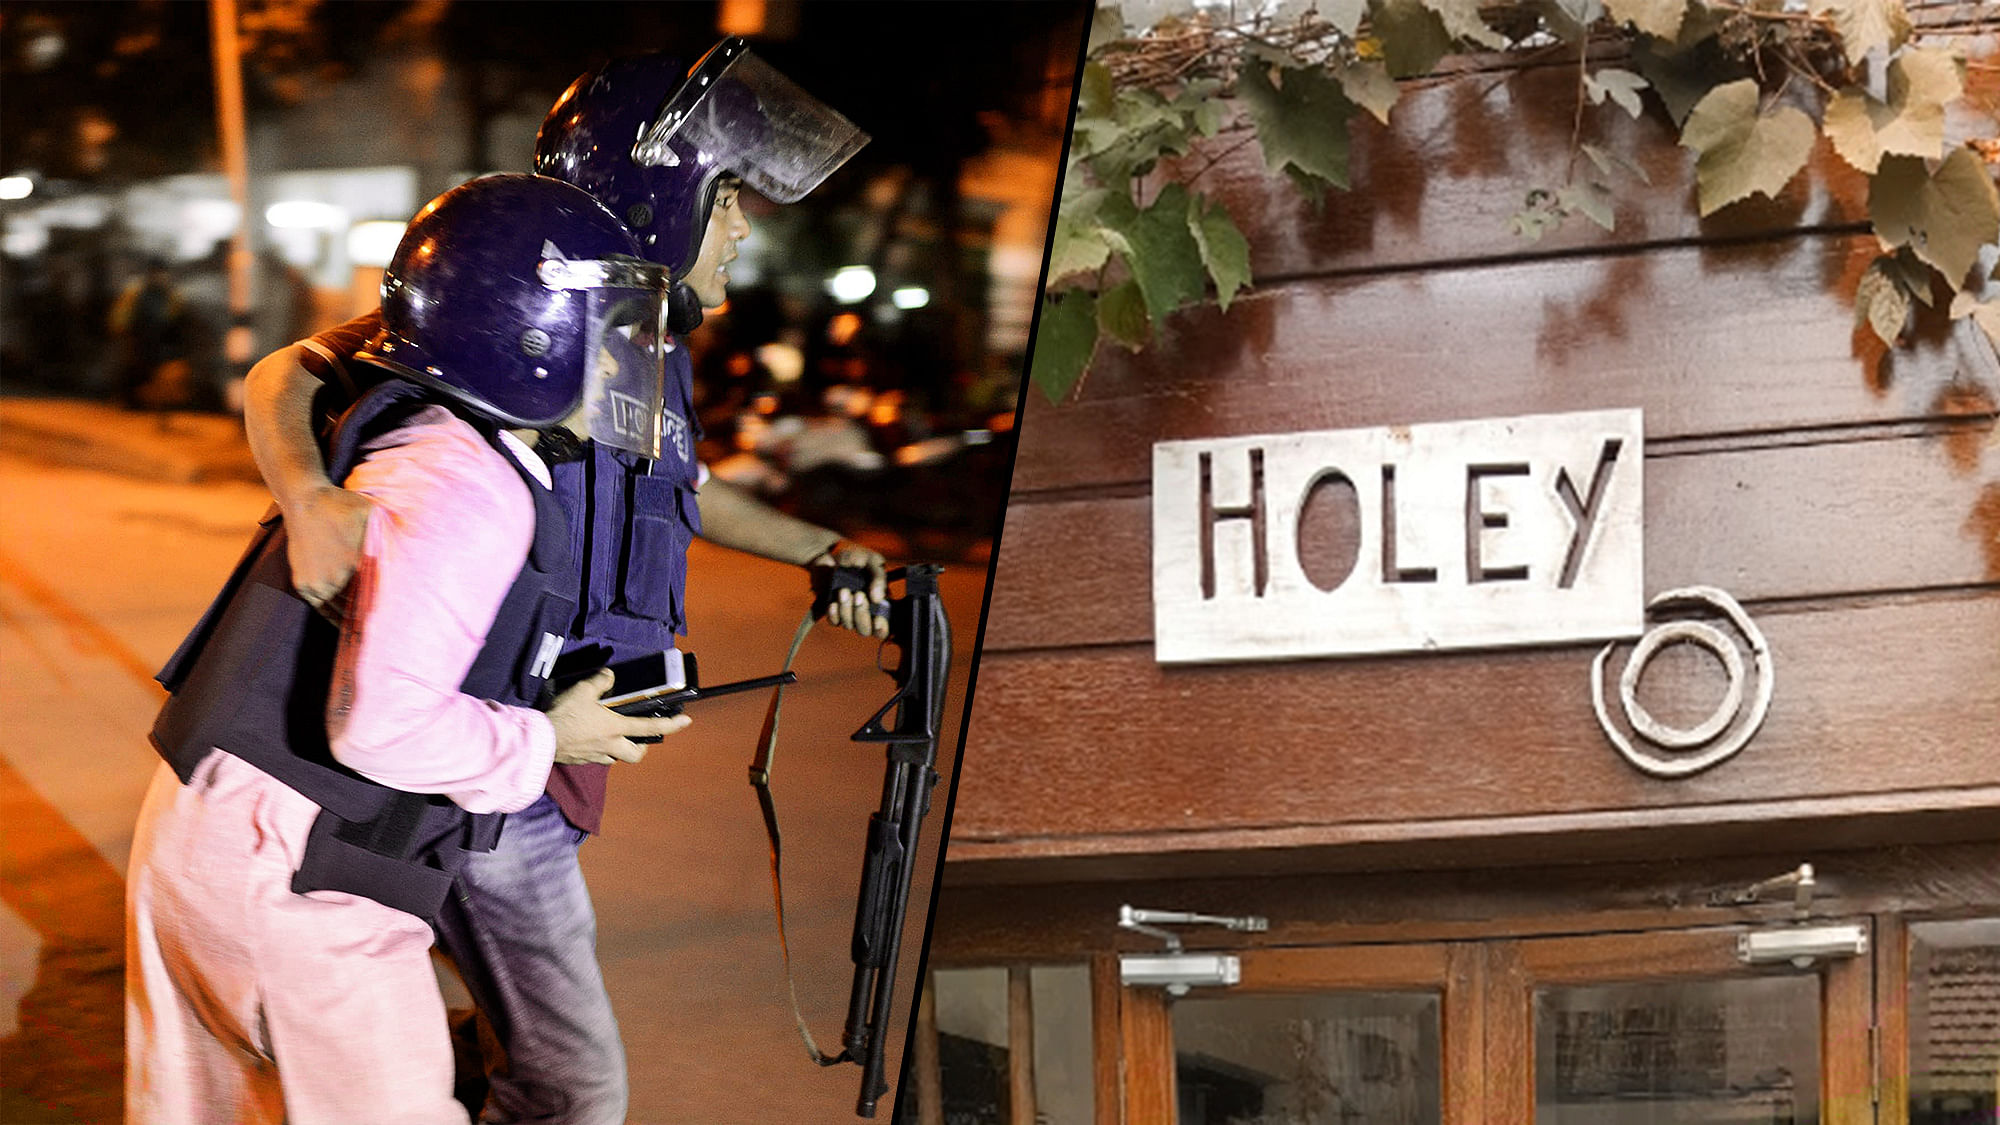 For many, the Holey Artisan Bakery was a symbol of the possibility of a more cosmopolitan future. (Photo altered by <b>The Quint</b>)